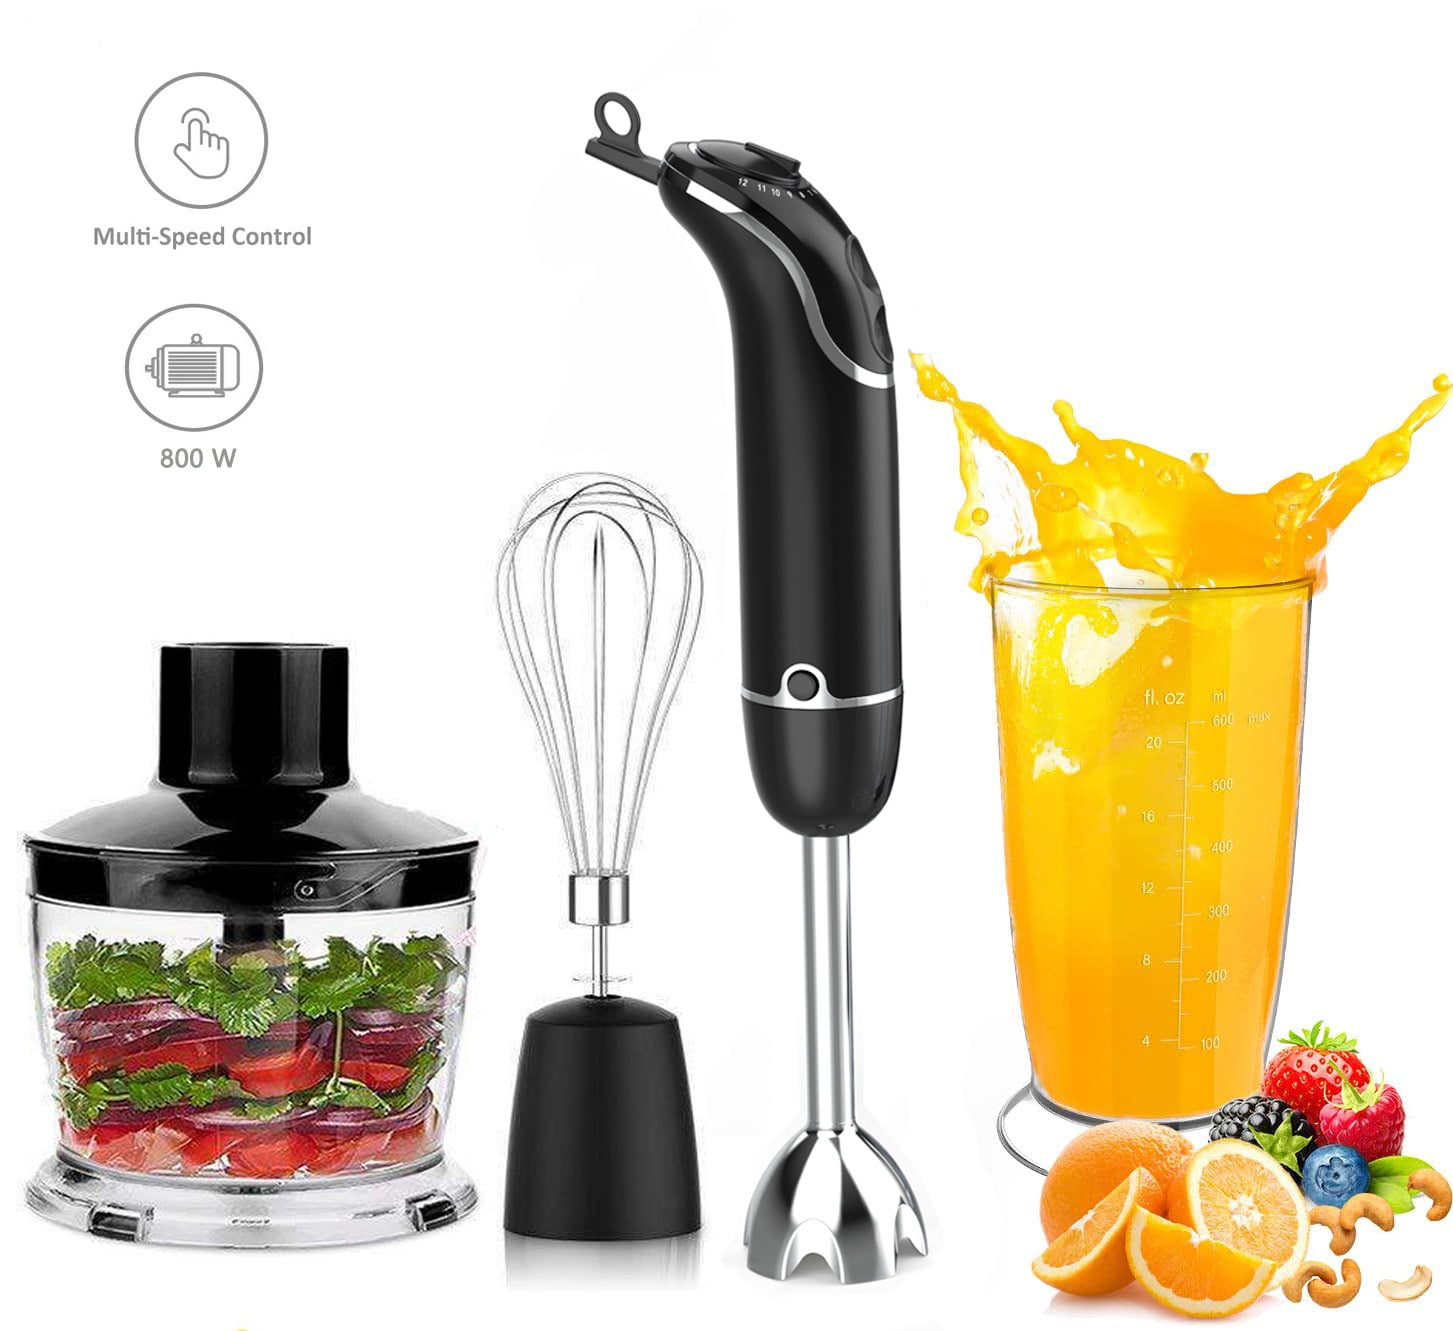 800W 5 in 1 Immersion Hand Blender Handheld 12 Speed Control Multifunctional